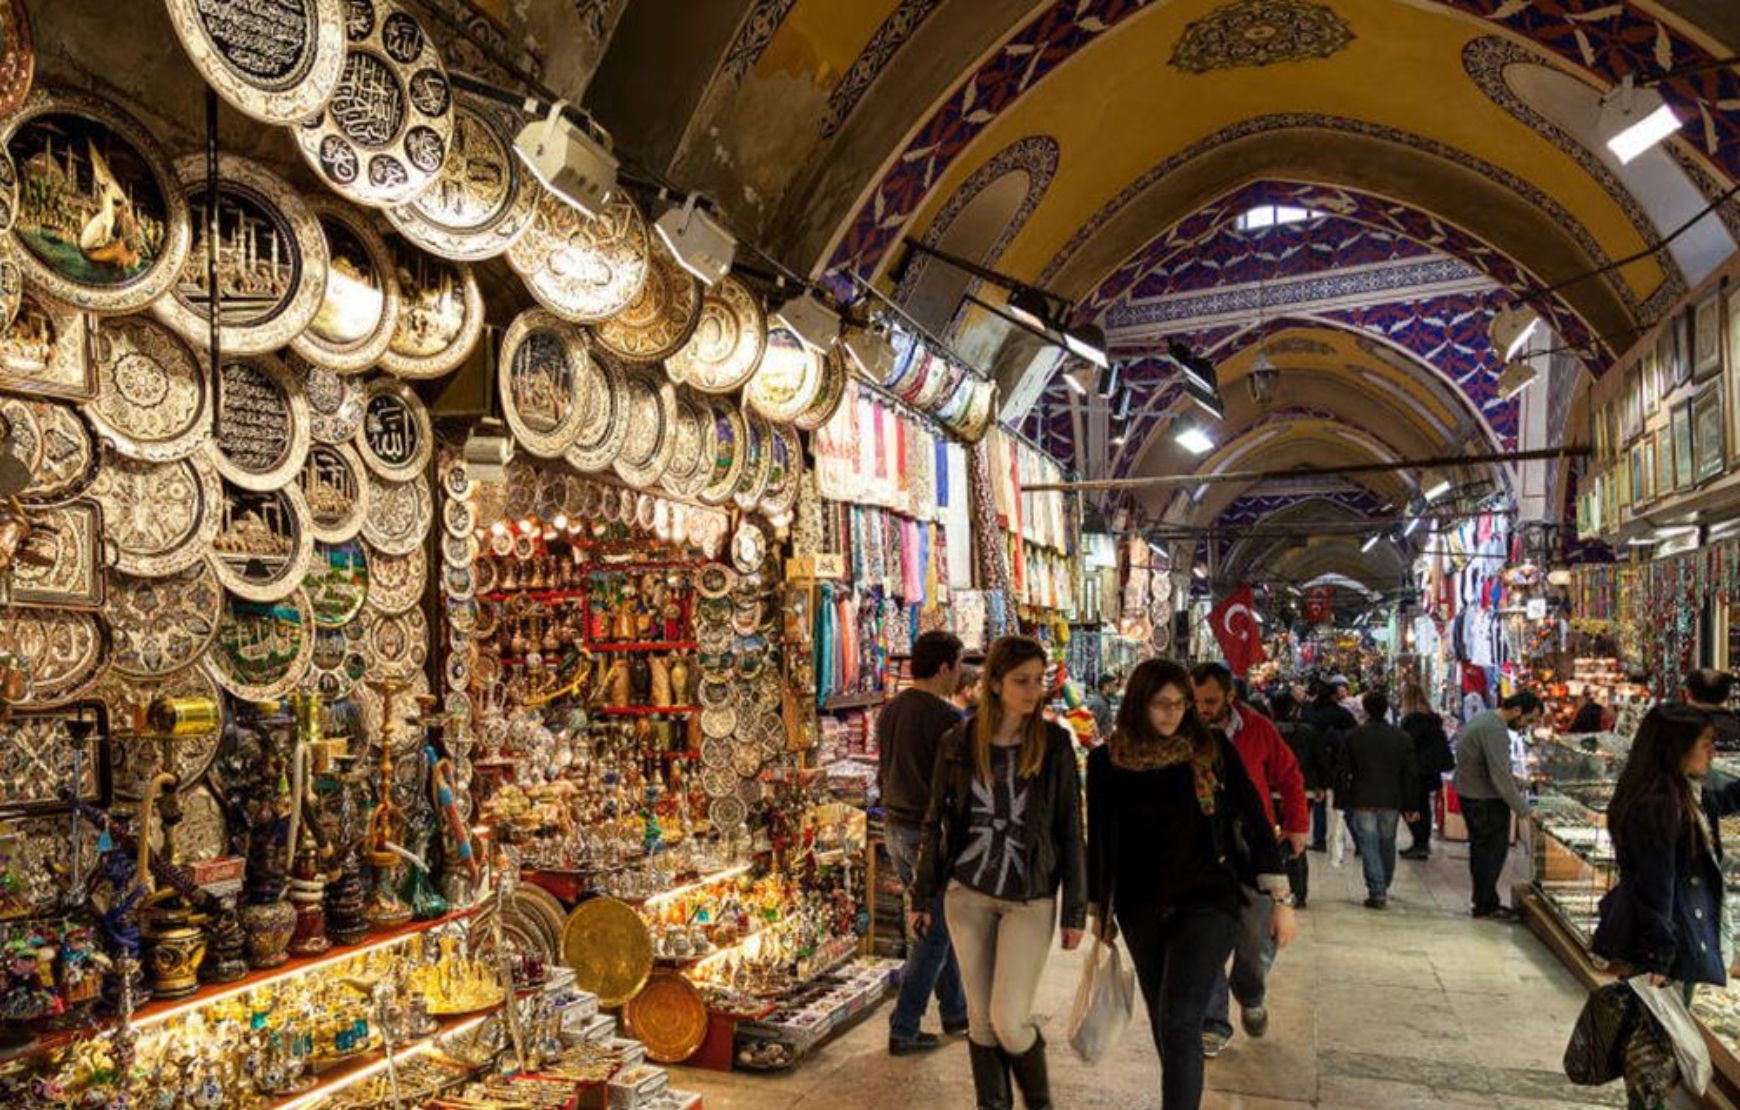 grand bazaar visit at our Istanbul guided tour